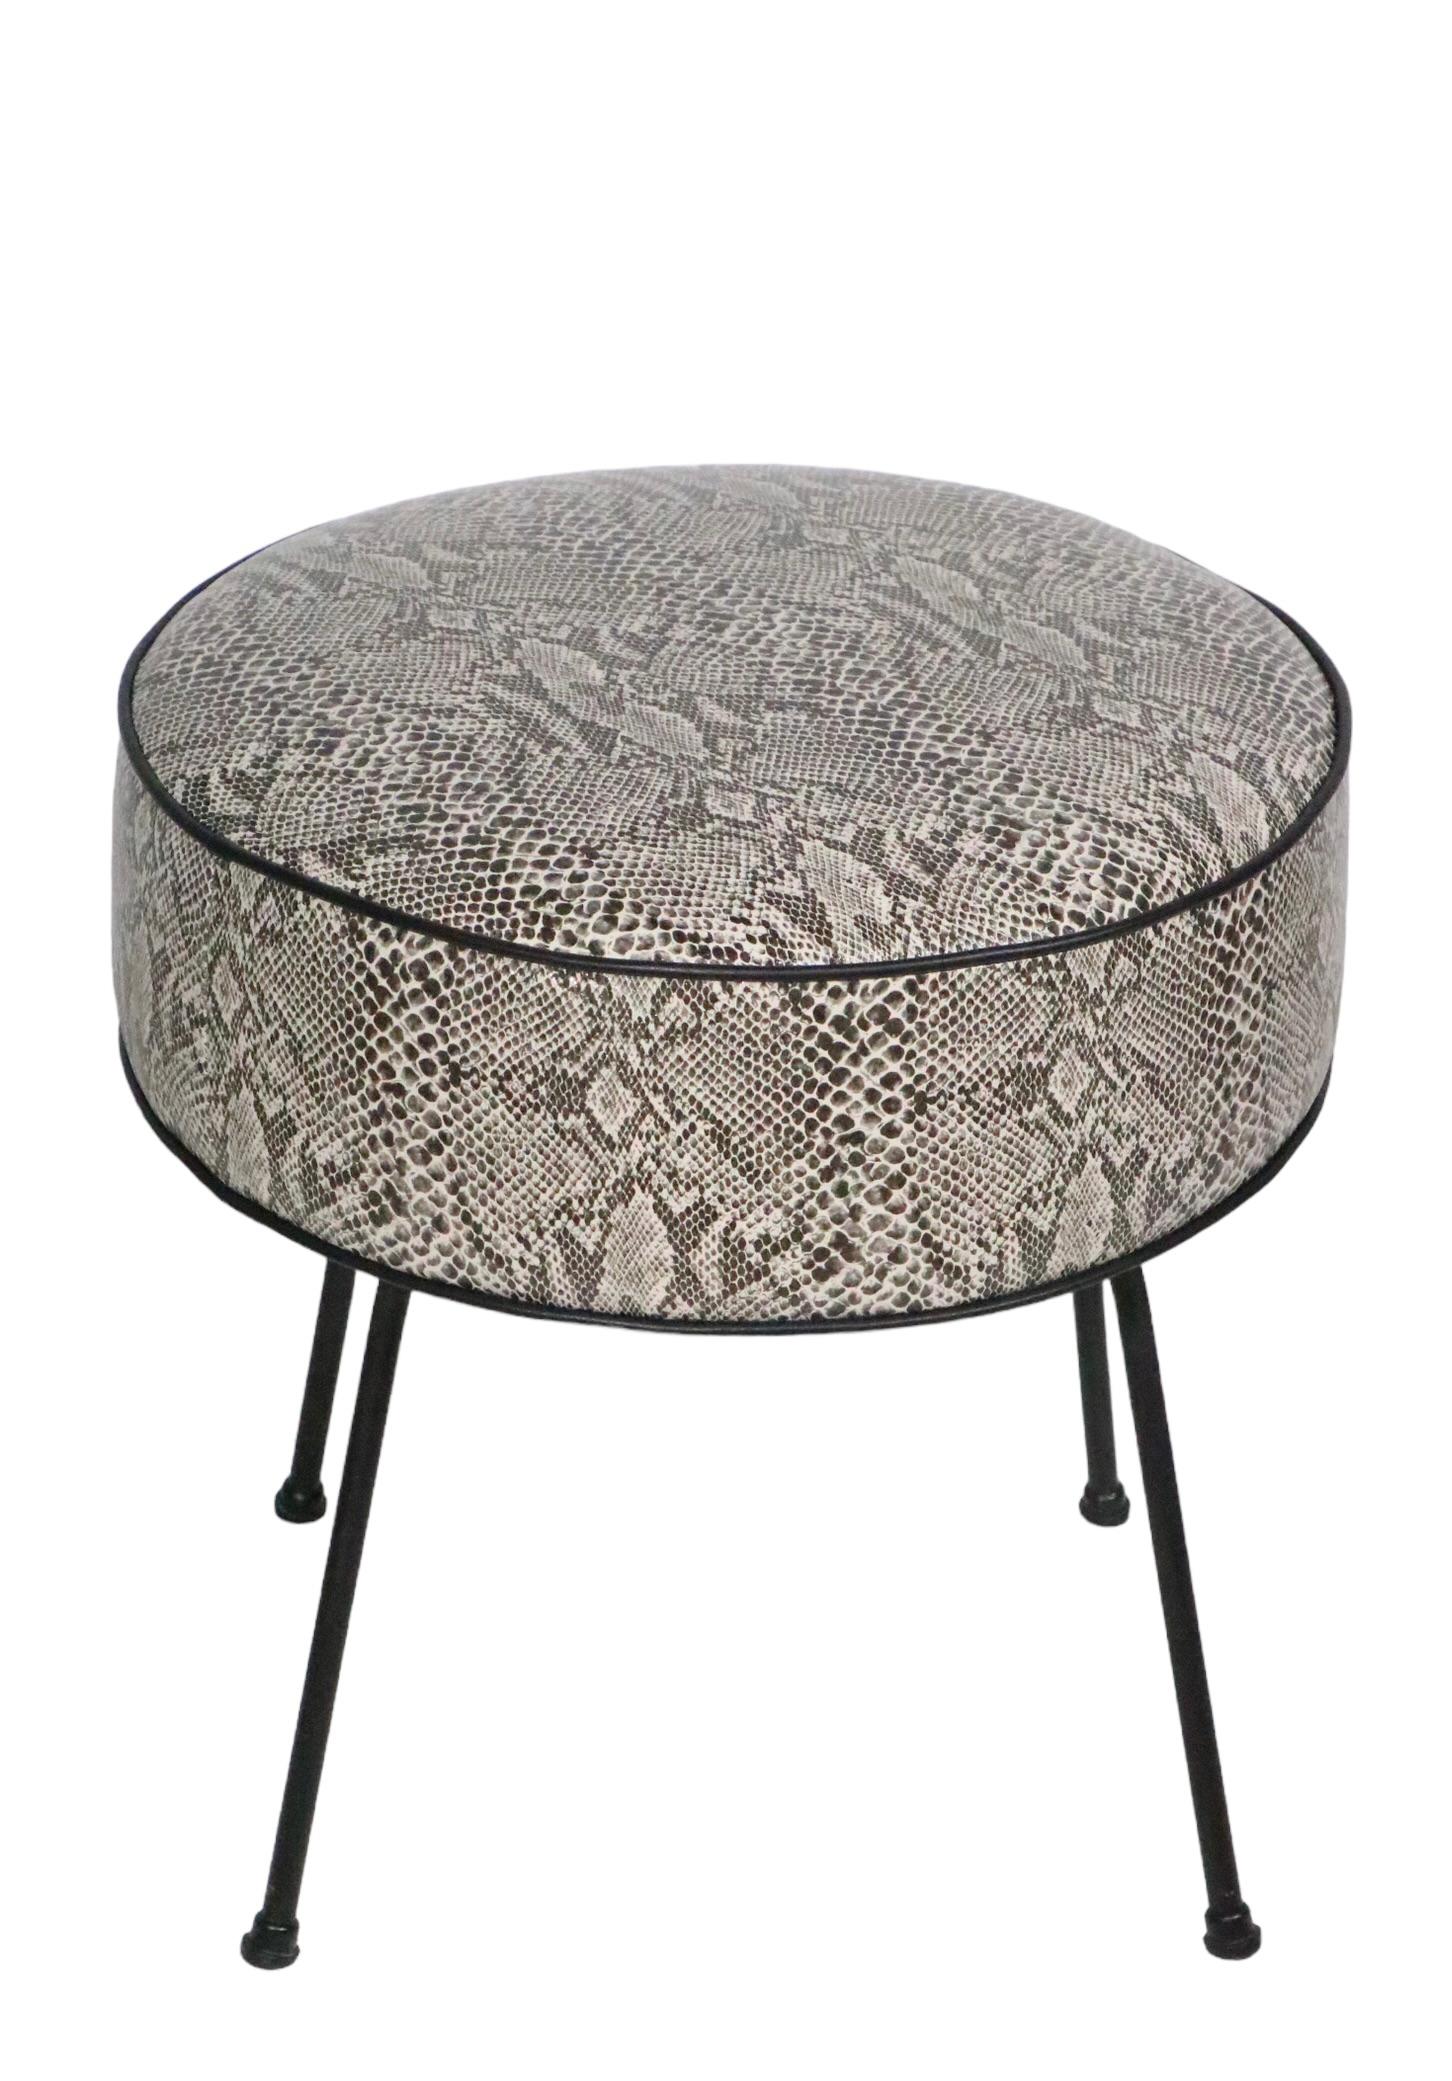 Mid Century Foot Stool Pouf Ottoman Reupholstered in Black and White Faux Python 6